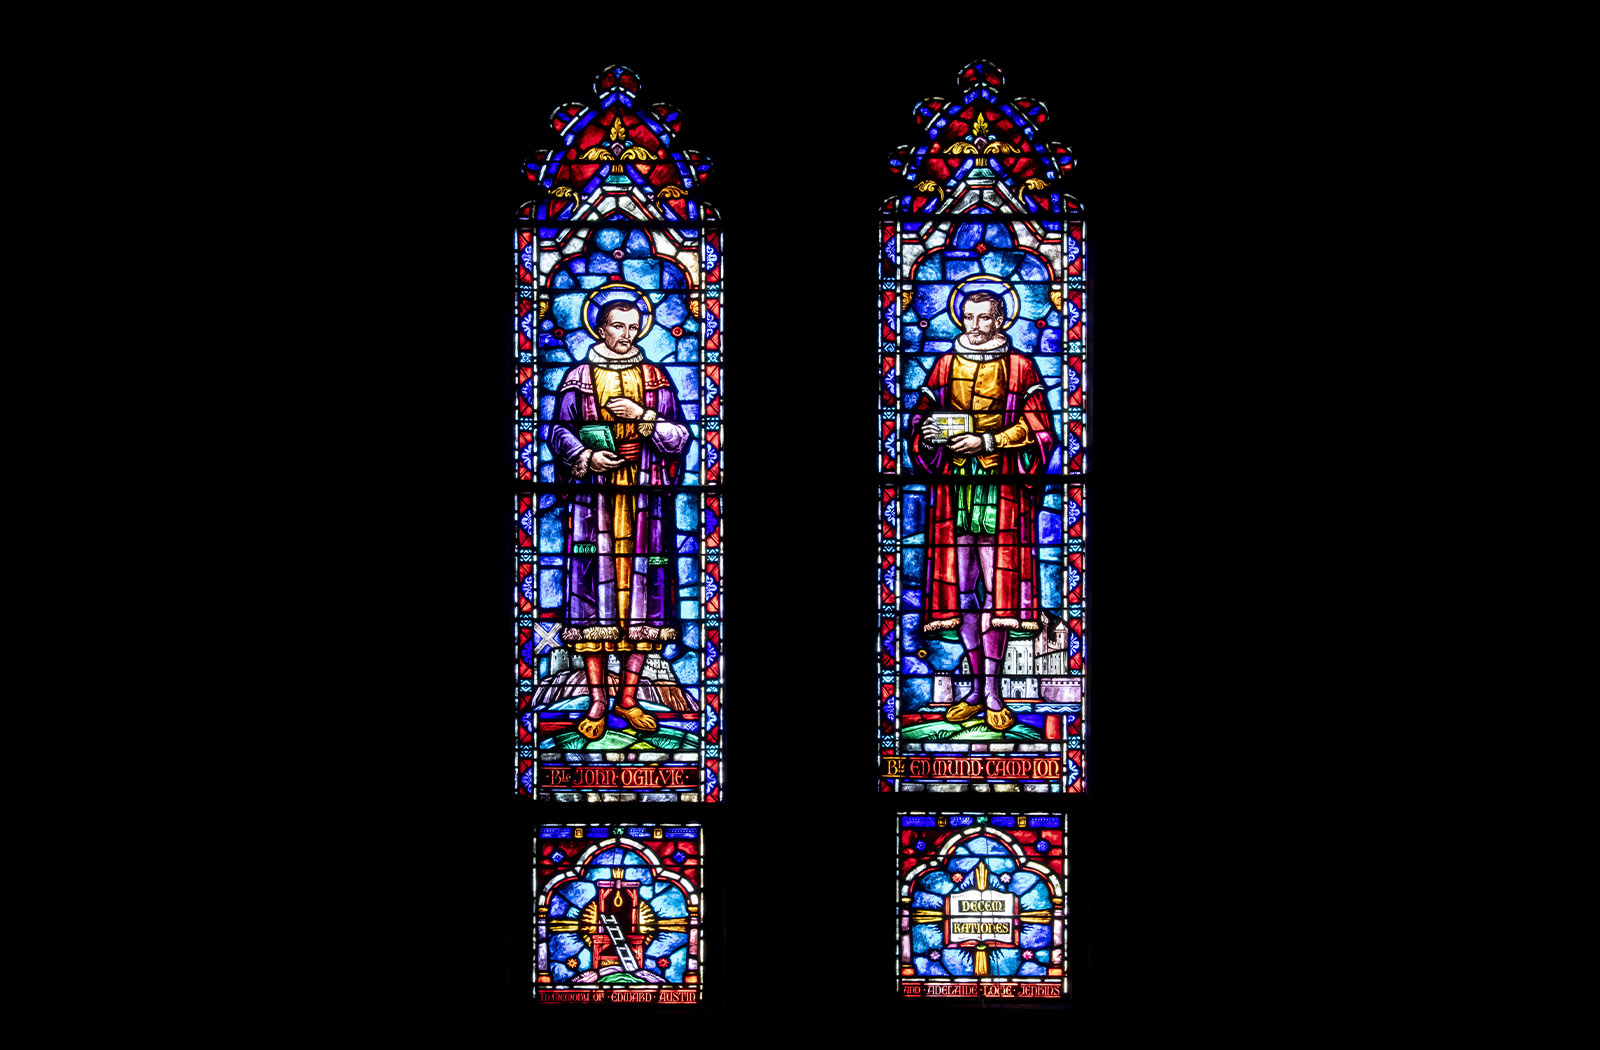 Two colorful stained glass panels of Blessed John Ogilvie and Blessed Edmund Campion